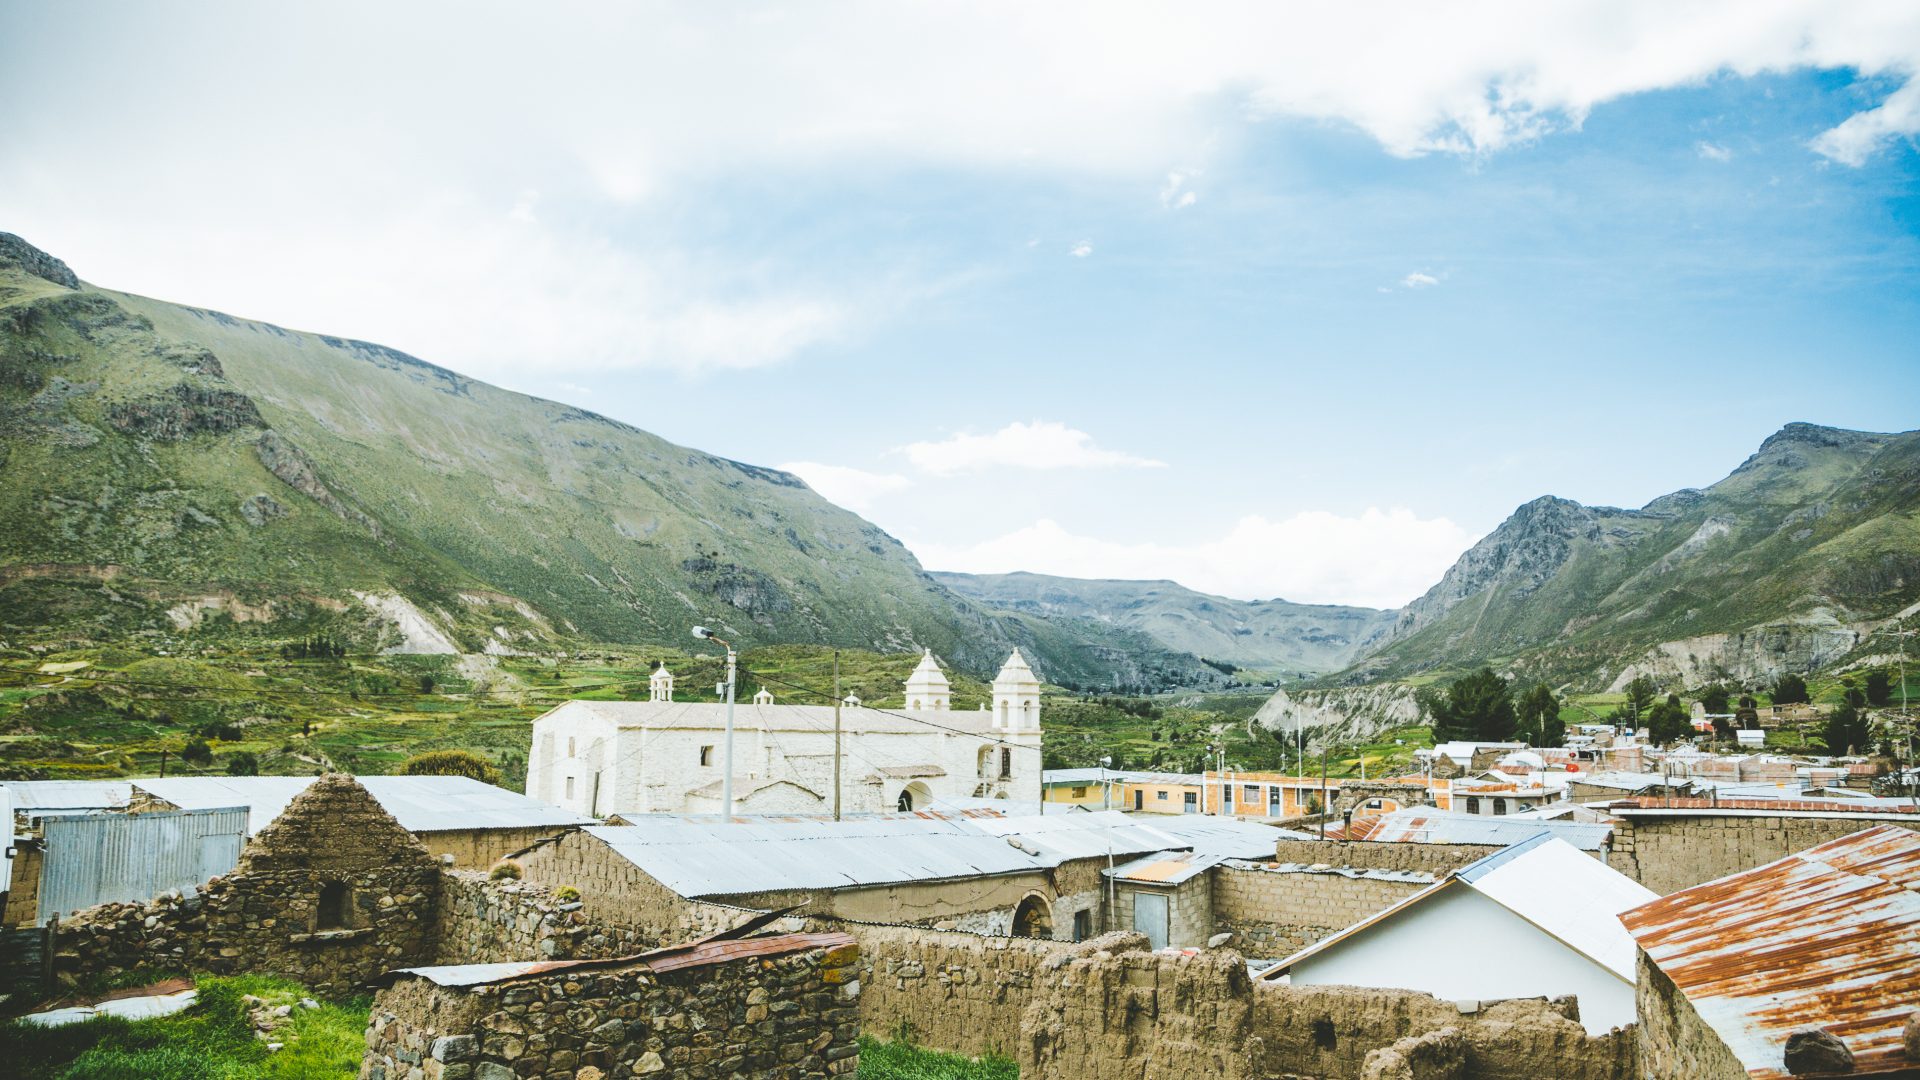 The view from our homestay showed off the beautiful town of Chivay, tucked in between the stunning Andean highlands.